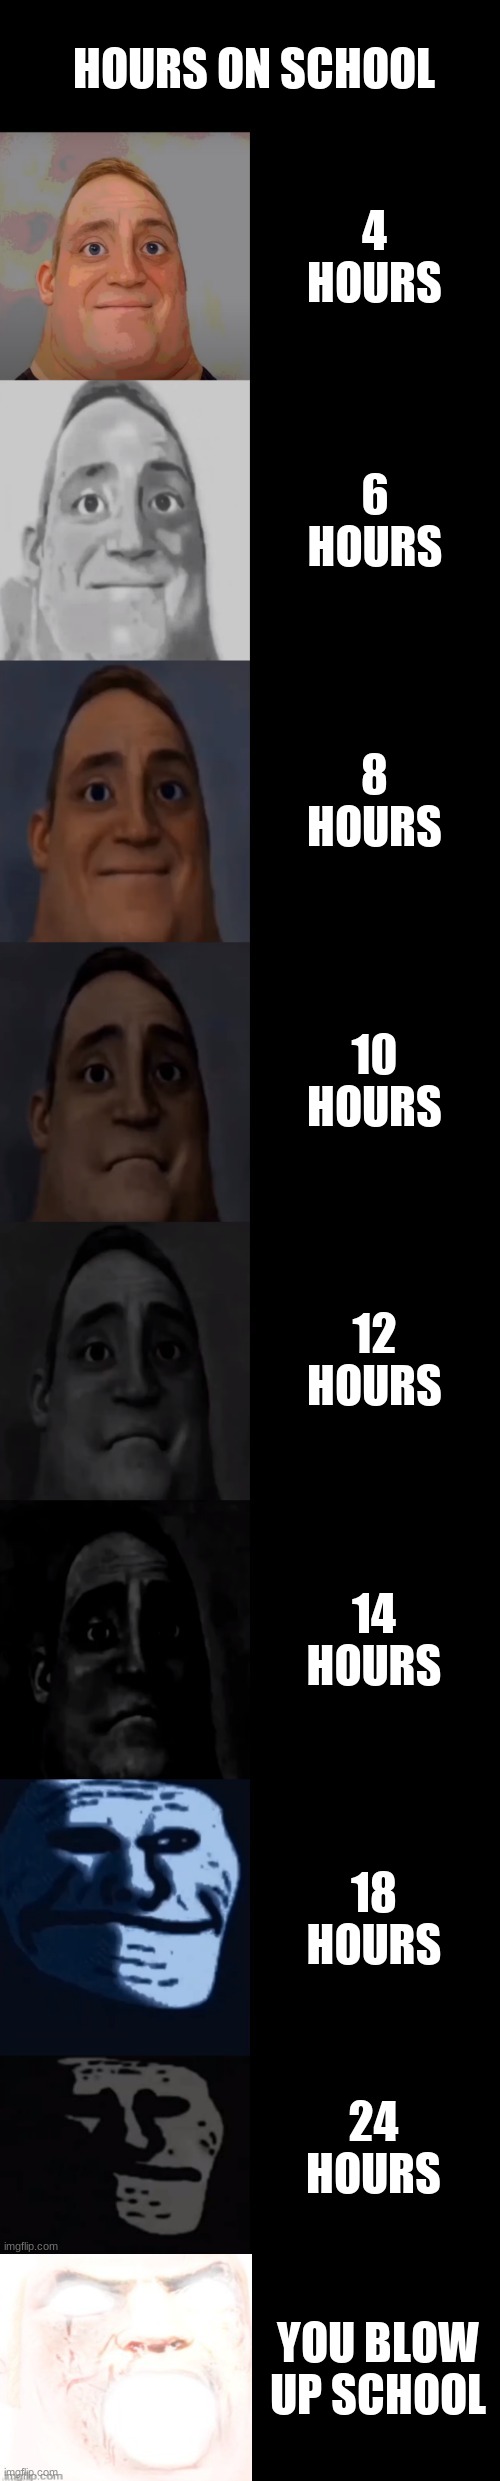 Mr Incredible becoming sad | HOURS ON SCHOOL; 4 HOURS; 6 HOURS; 8 HOURS; 10 HOURS; 12 HOURS; 14 HOURS; 18 HOURS; 24 HOURS; YOU BLOW UP SCHOOL | image tagged in mr incredible becoming sad | made w/ Imgflip meme maker